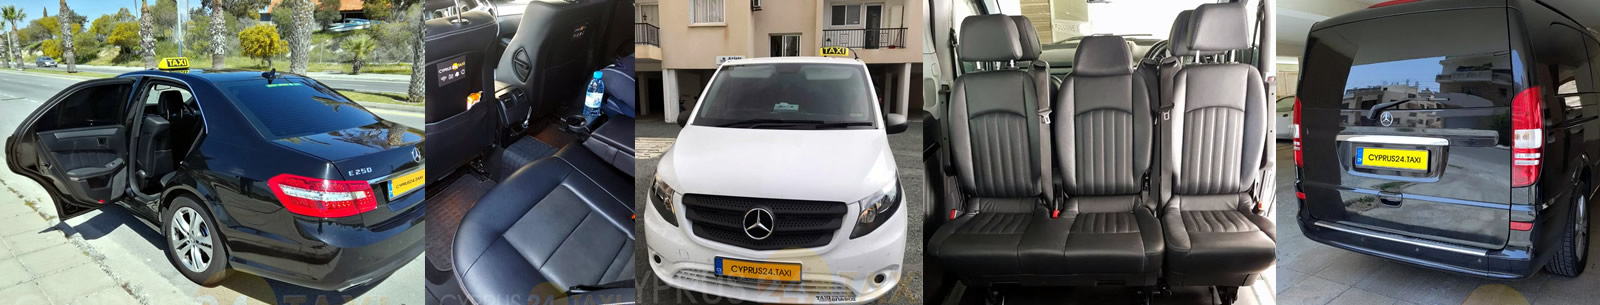 Cyprus taxi: cars and minibuses photo